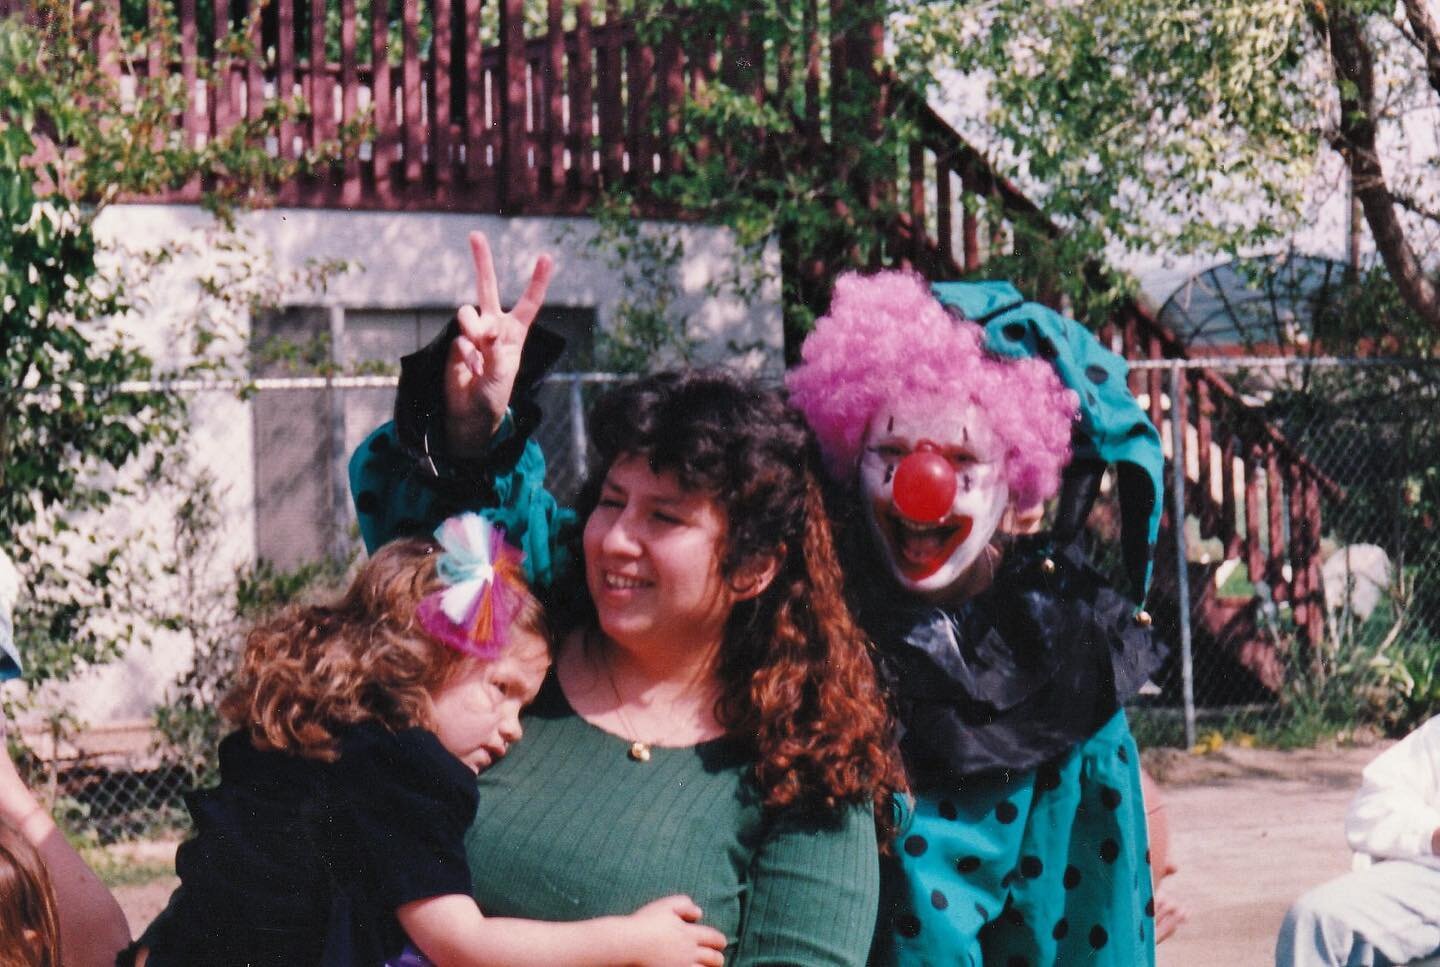 It's my party and I'll cry if I want to. 
Cindy with mom Angela and the clown.